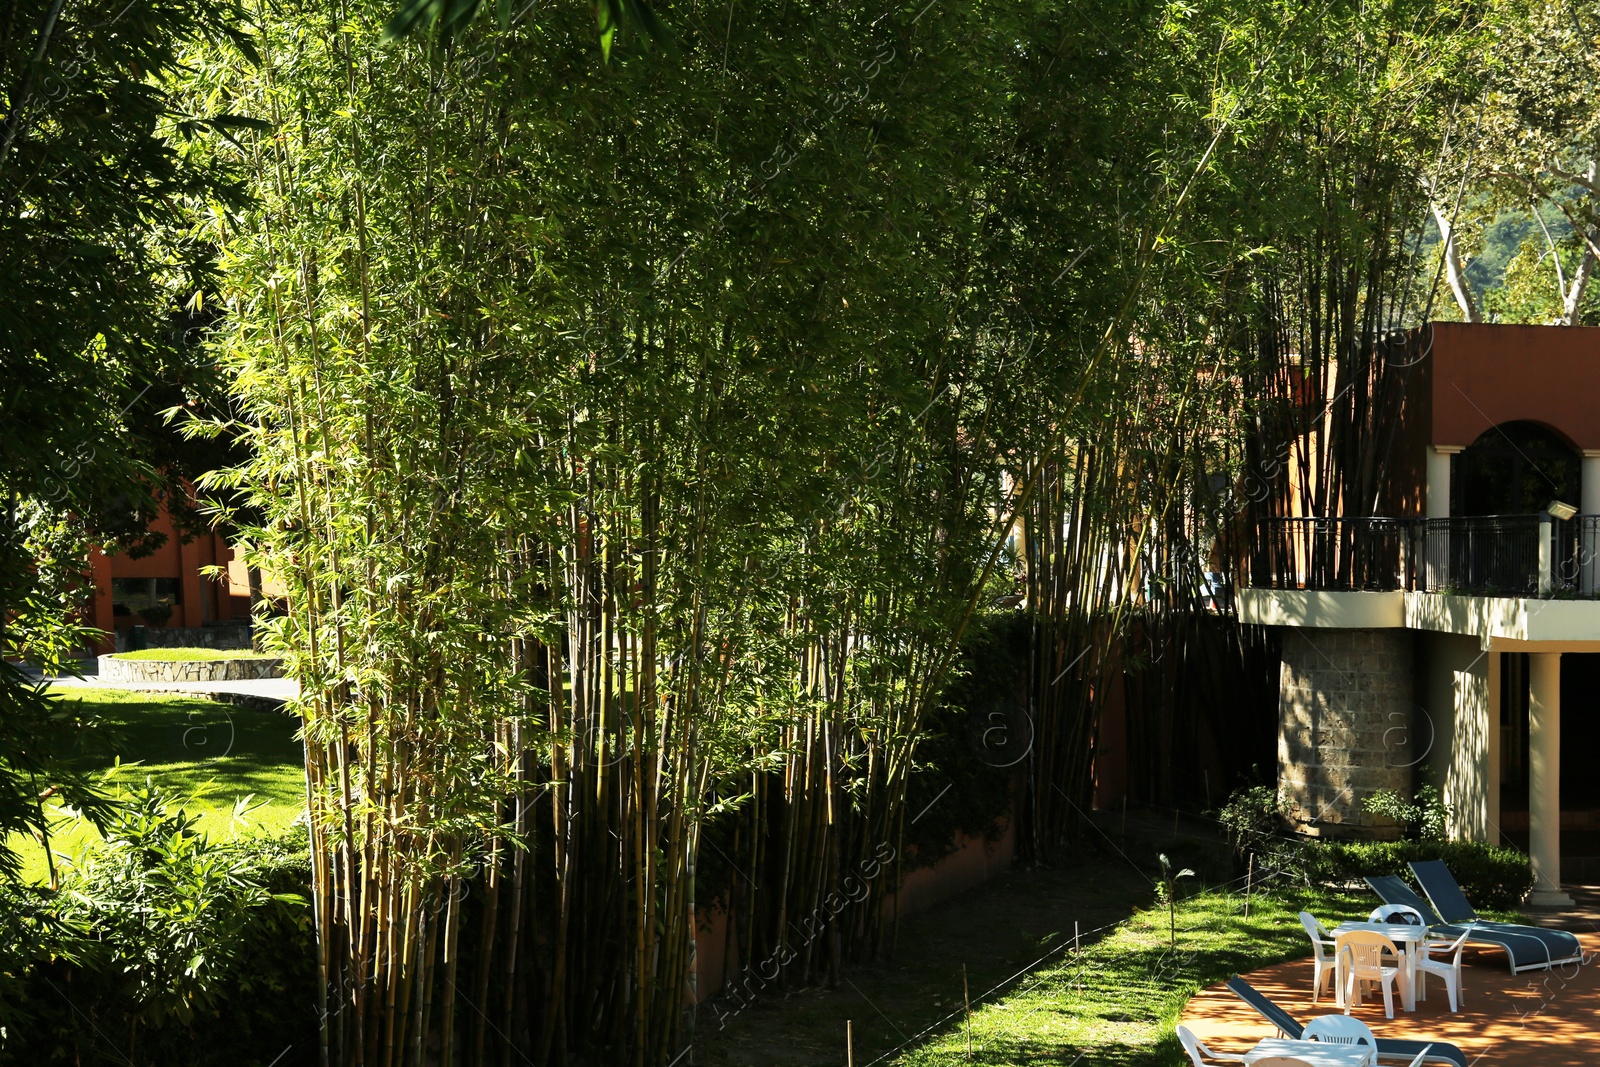 Photo of Many bamboo stalks with green leaves in park